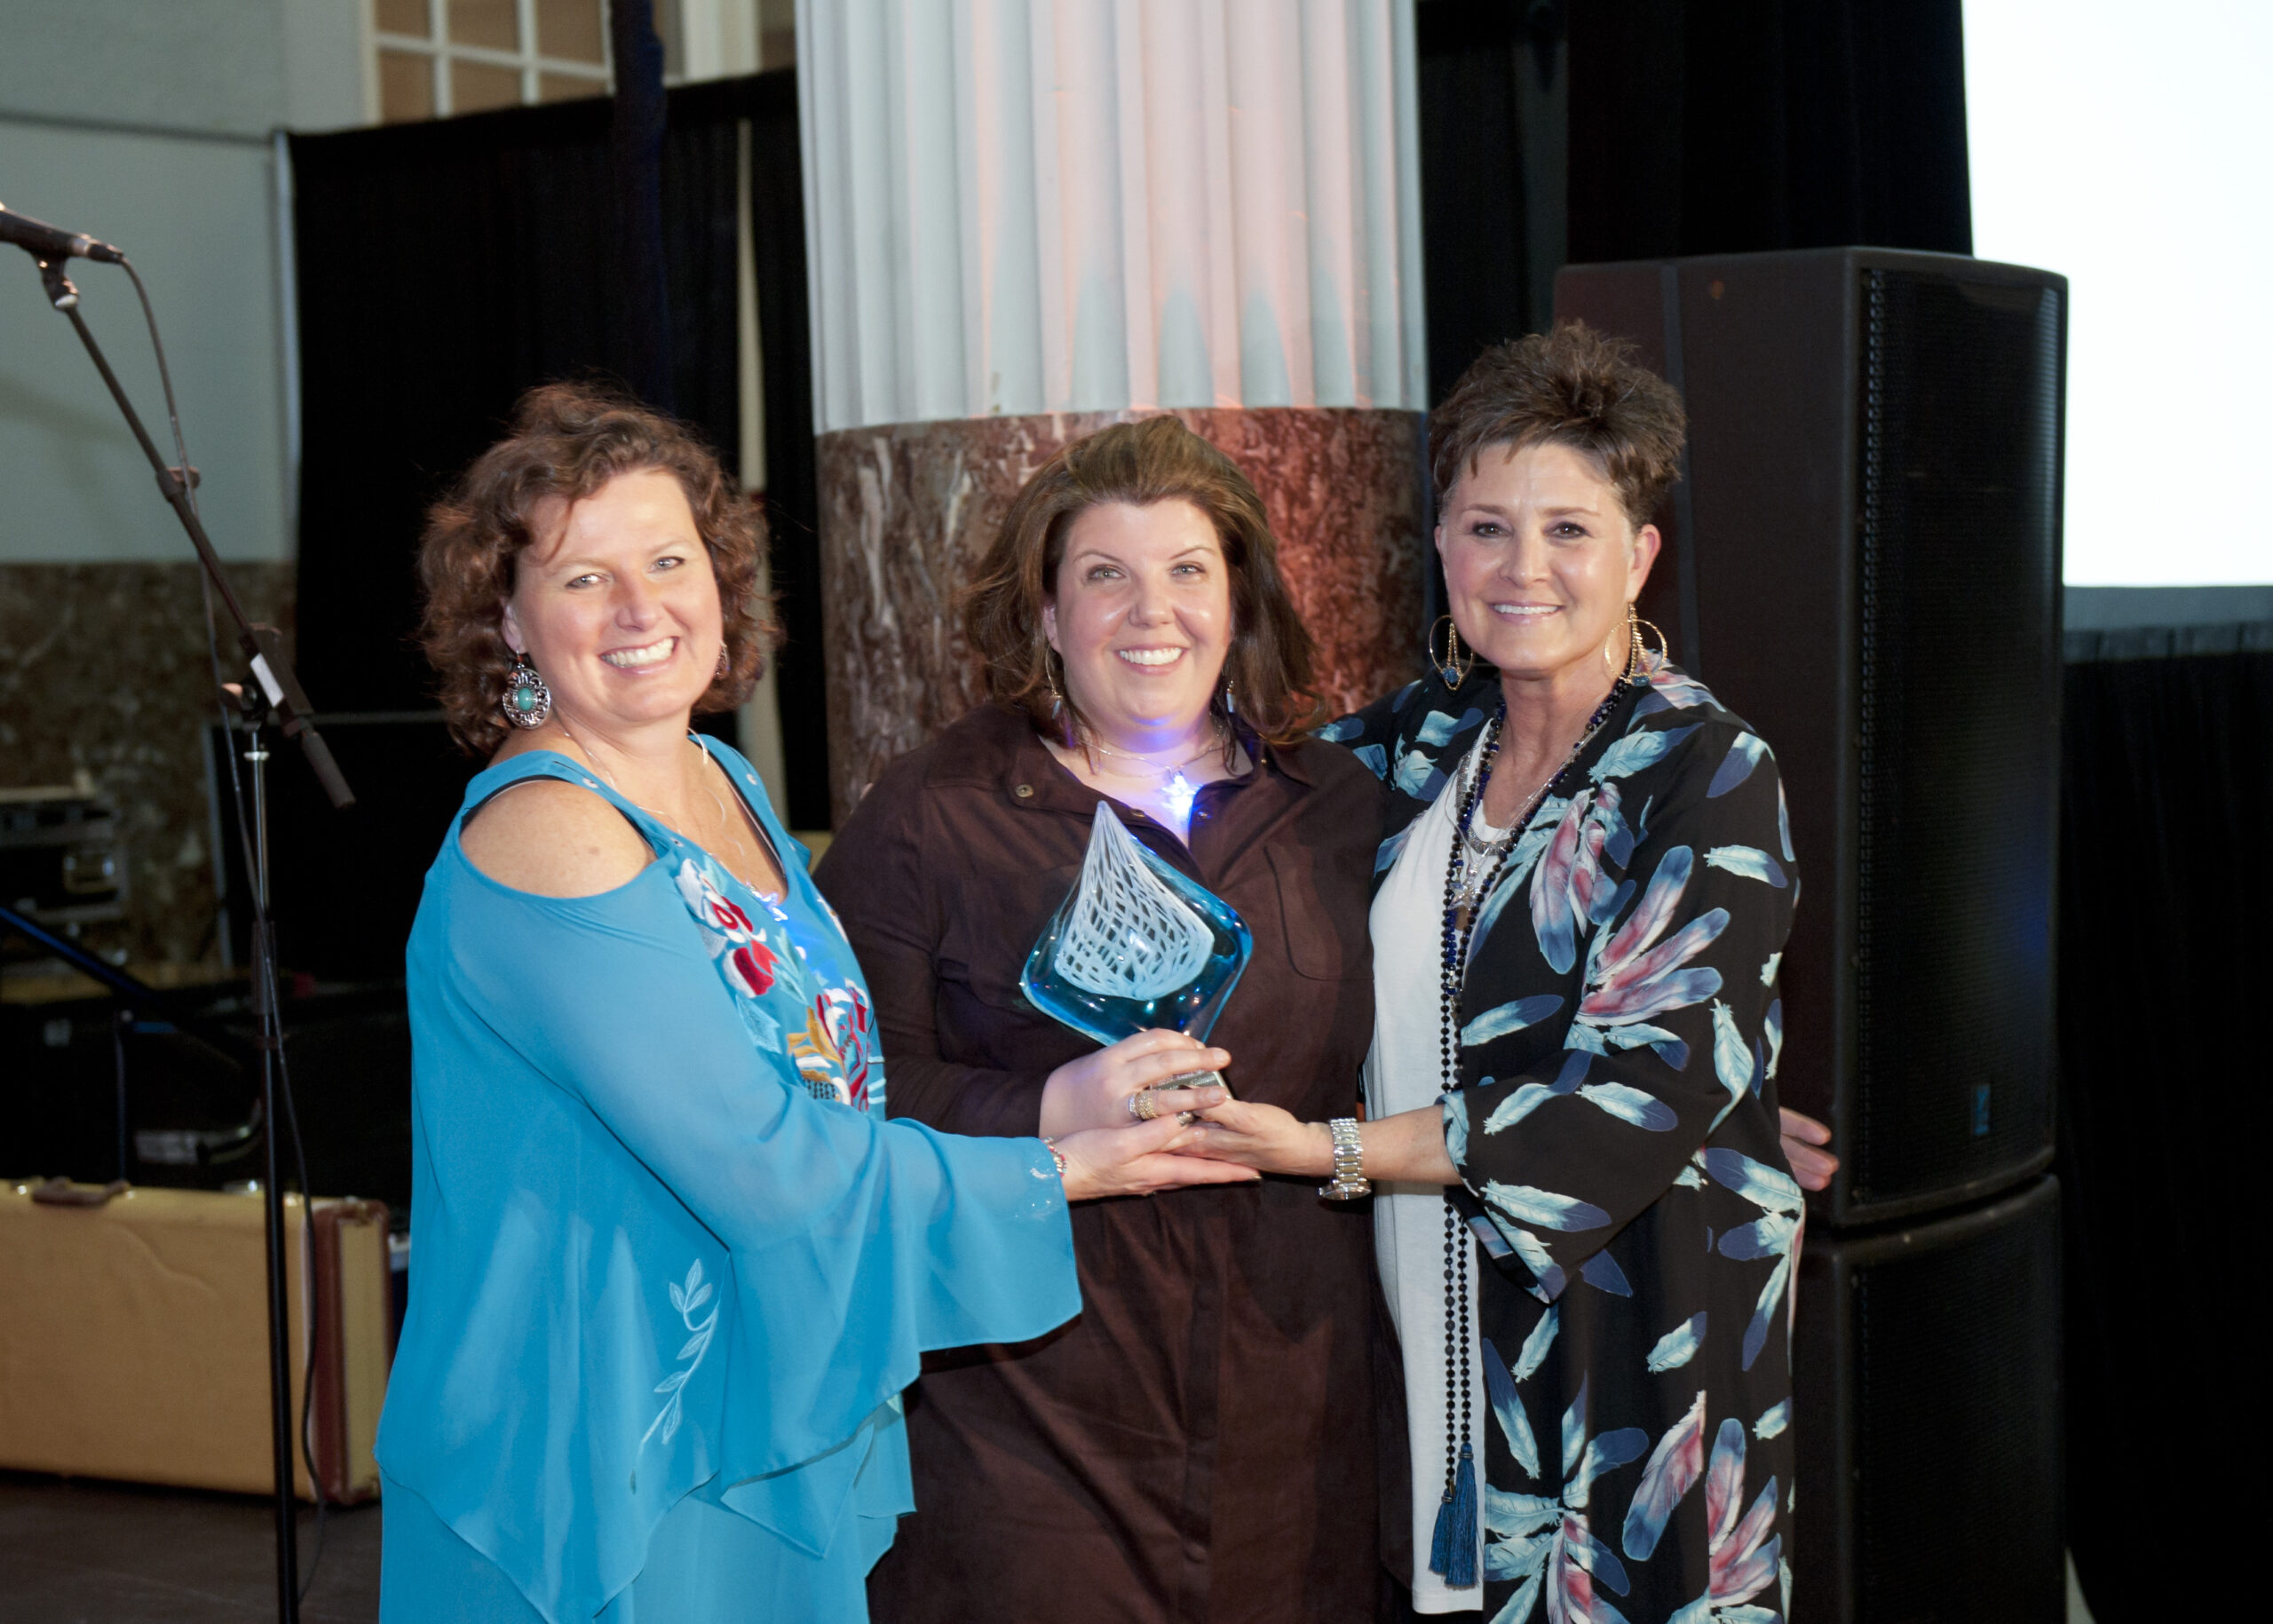 Image of Pictured left to right: Lisa Spain (Executive Director), Courtney Eidman, Sandy Sledge (Board Member)